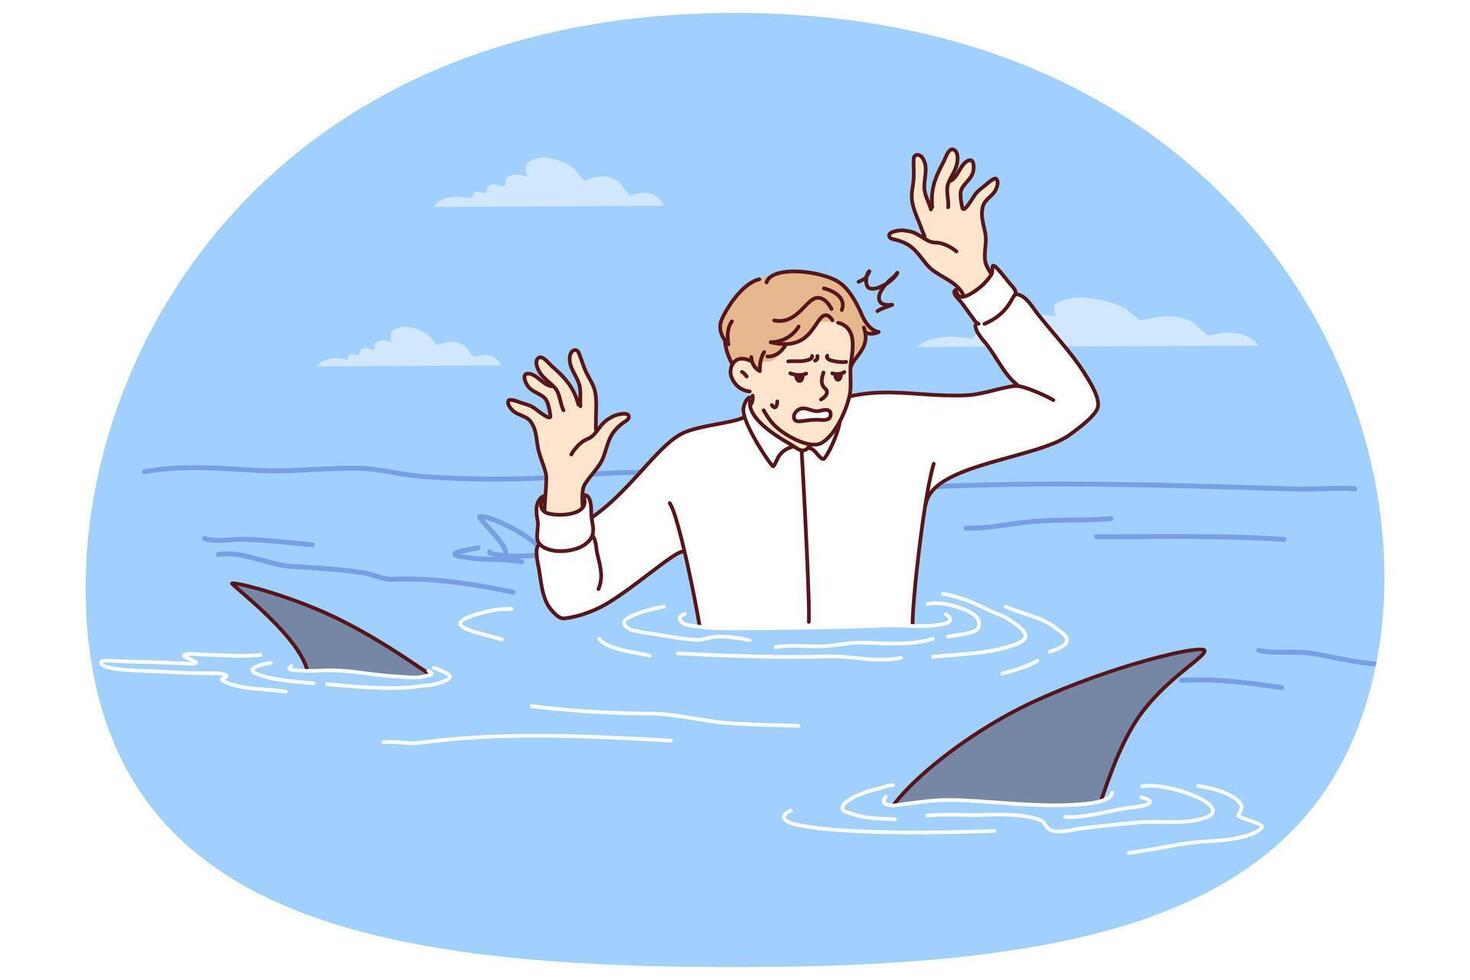 Frightened man in business shirt is in water with sharks and raises hands out of panic. Vector image